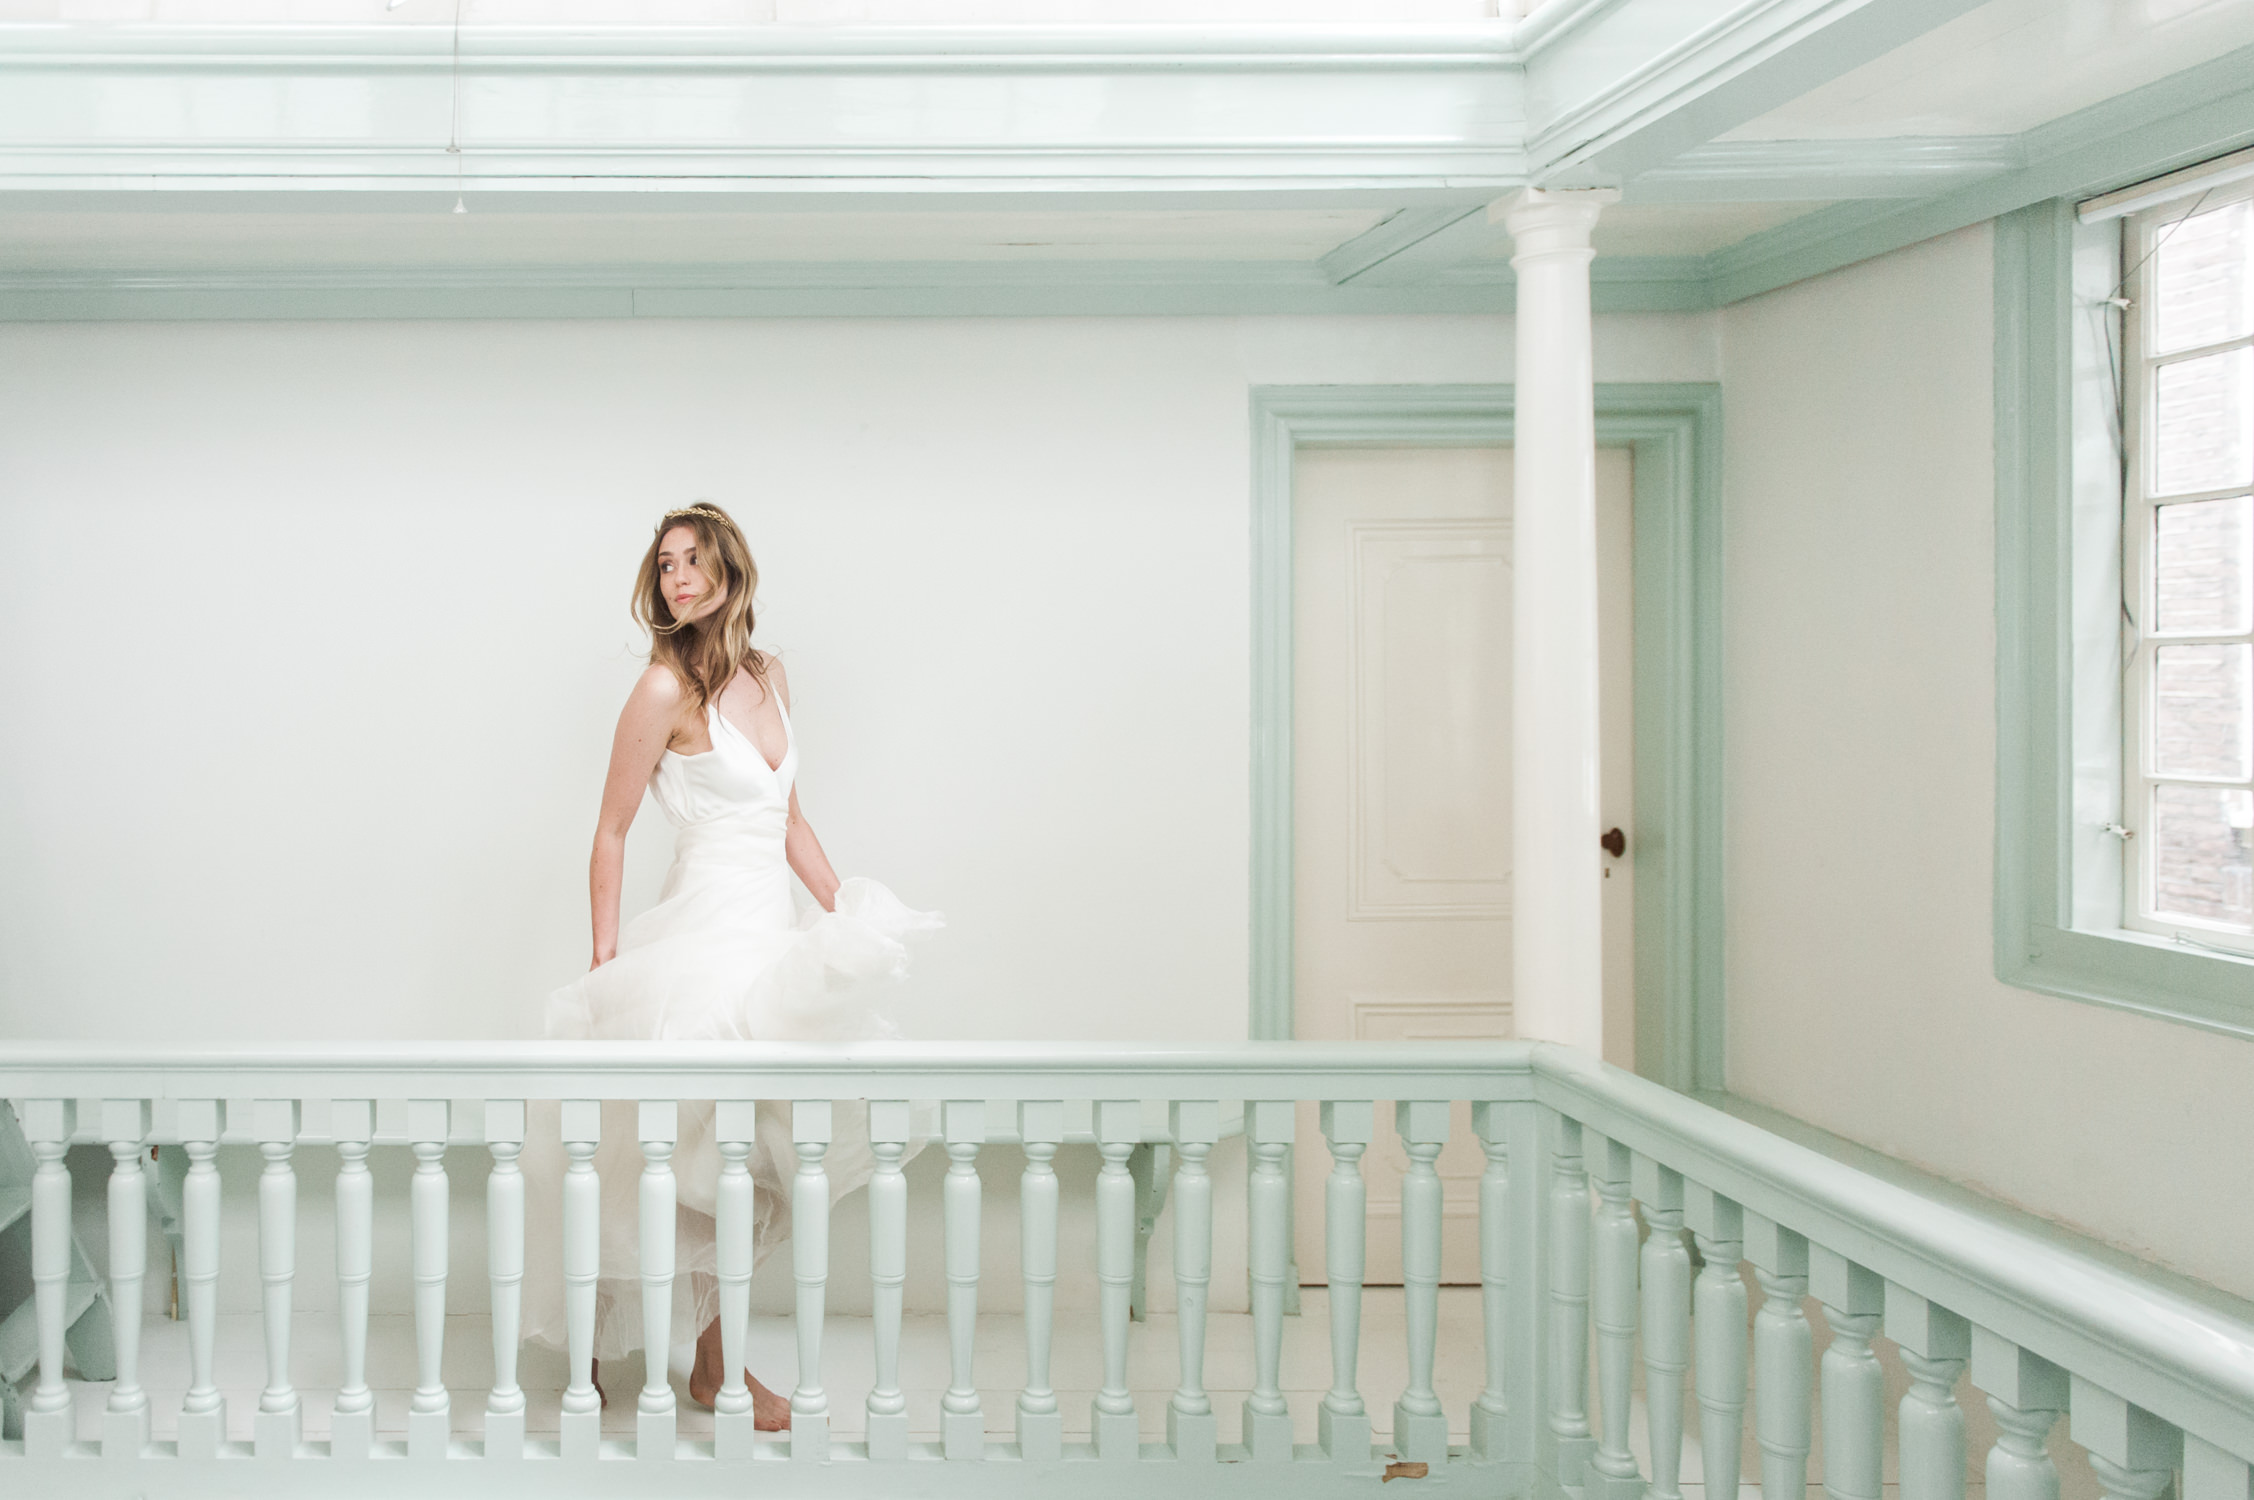 Fine art wedding photography of a bride running in a gallery